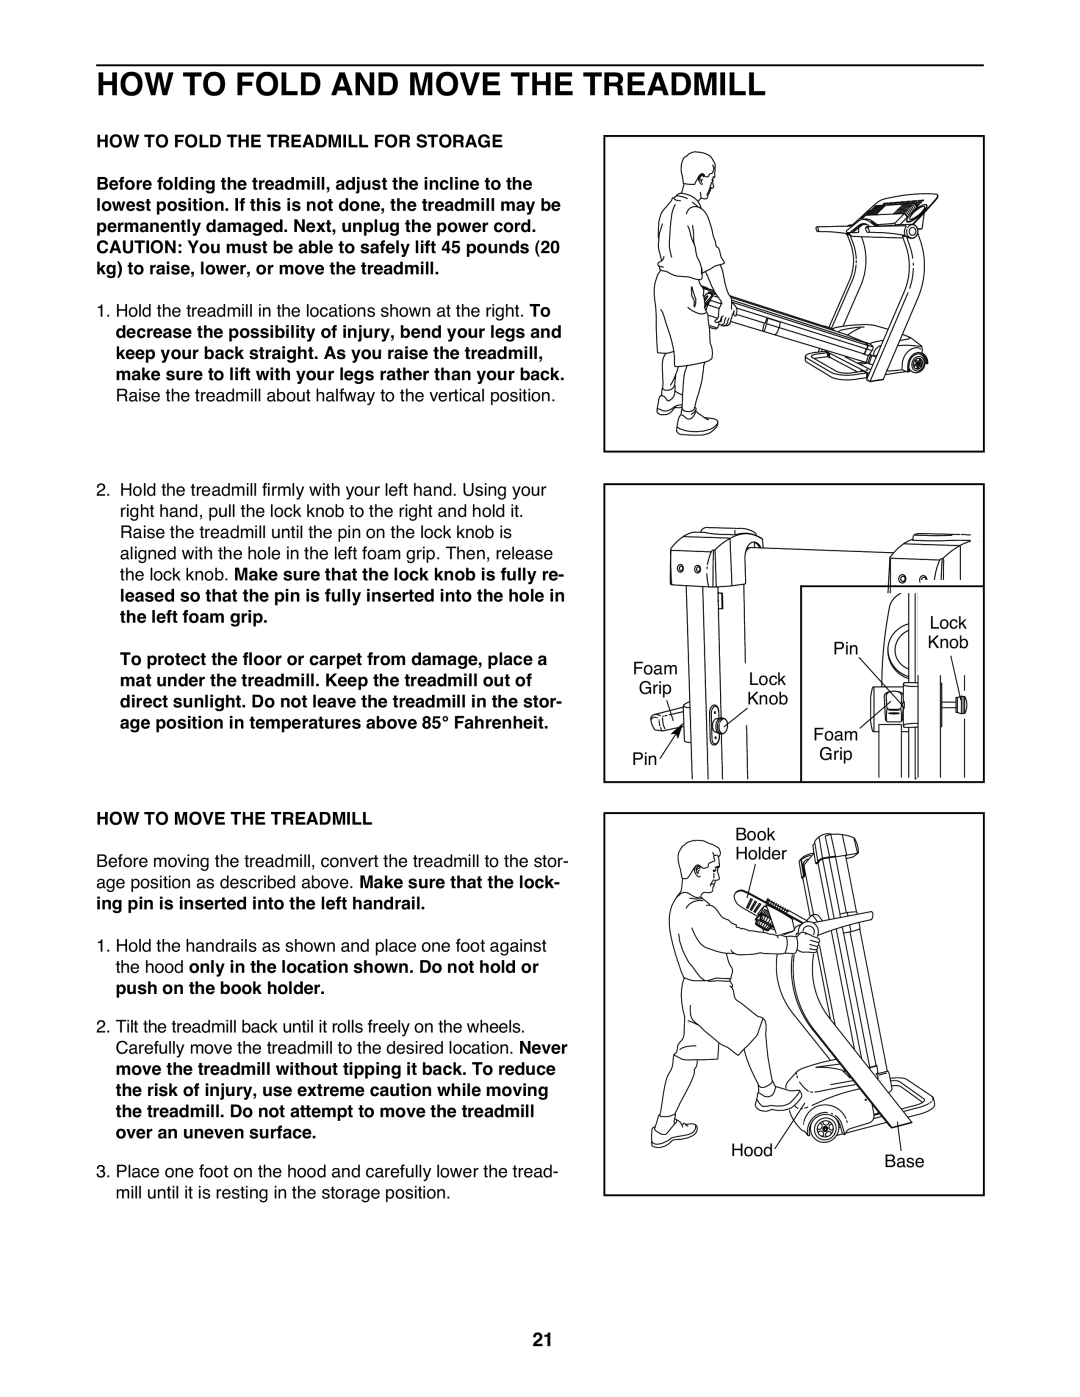 Healthrider HRT12920 How To Fold And Move The Treadmill, How To Fold The Treadmill For Storage, How To Move The Treadmill 